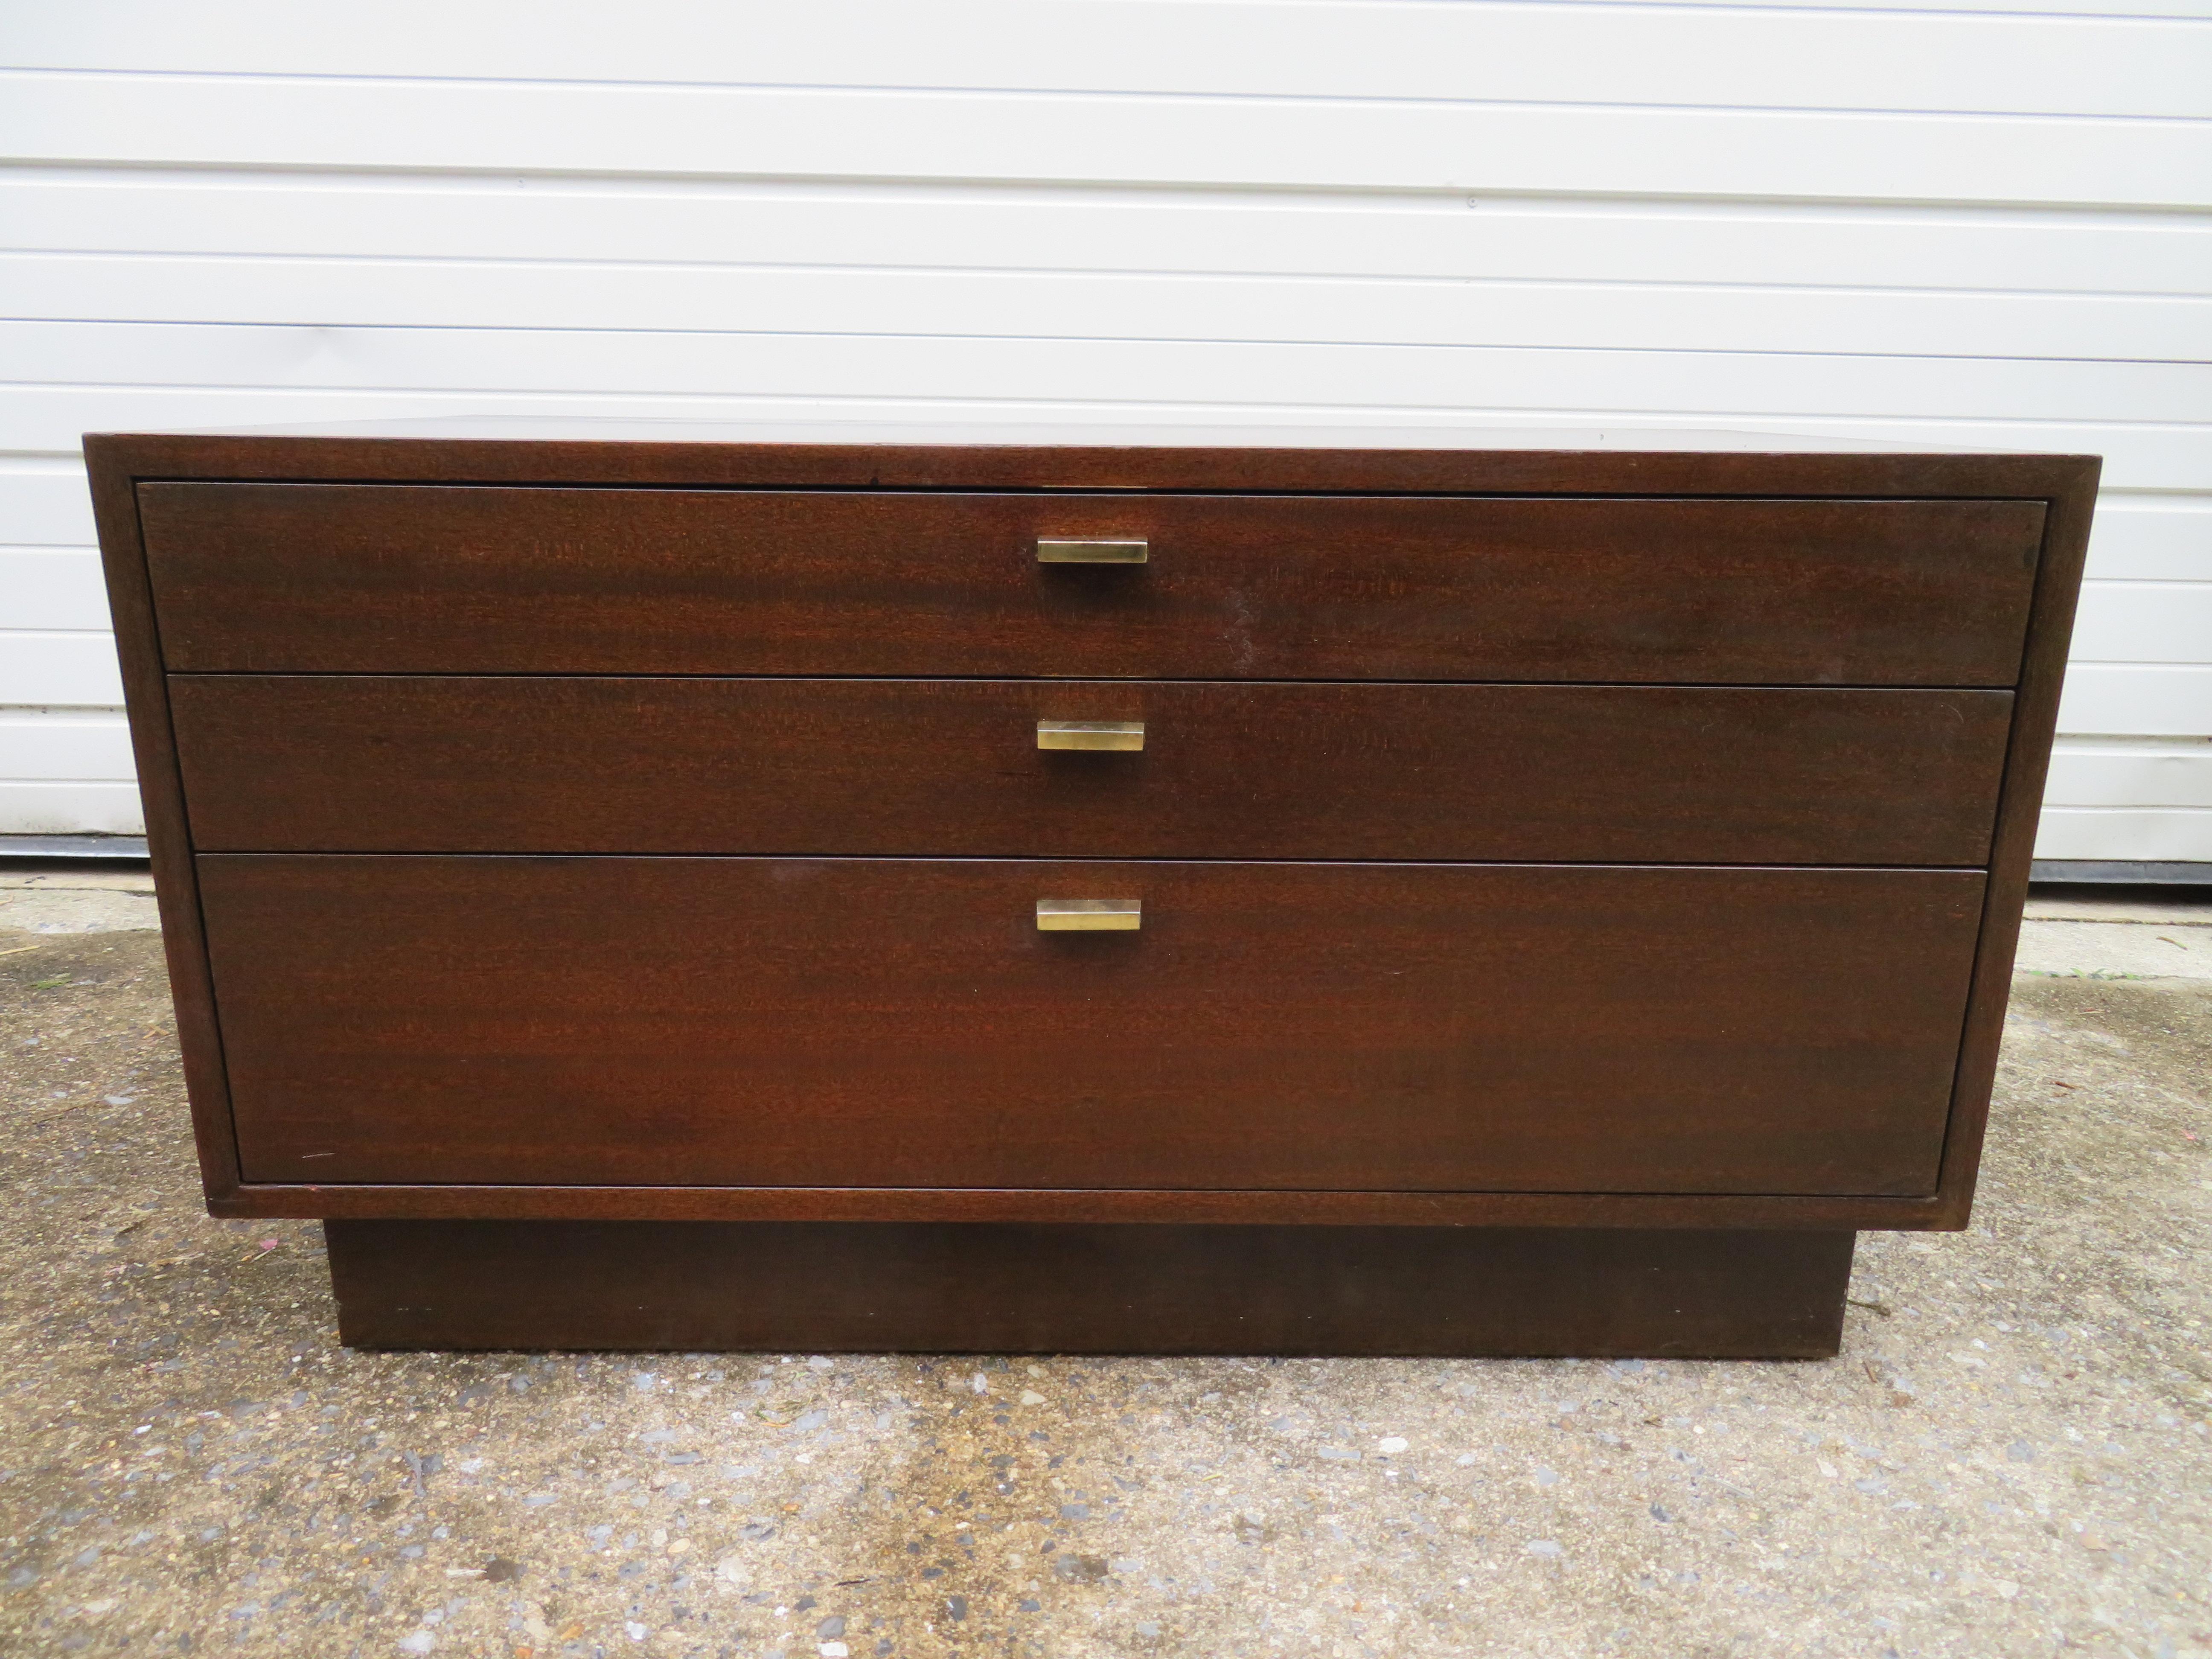 Handsome small-scale chest or side table designed by Harvey Probber.